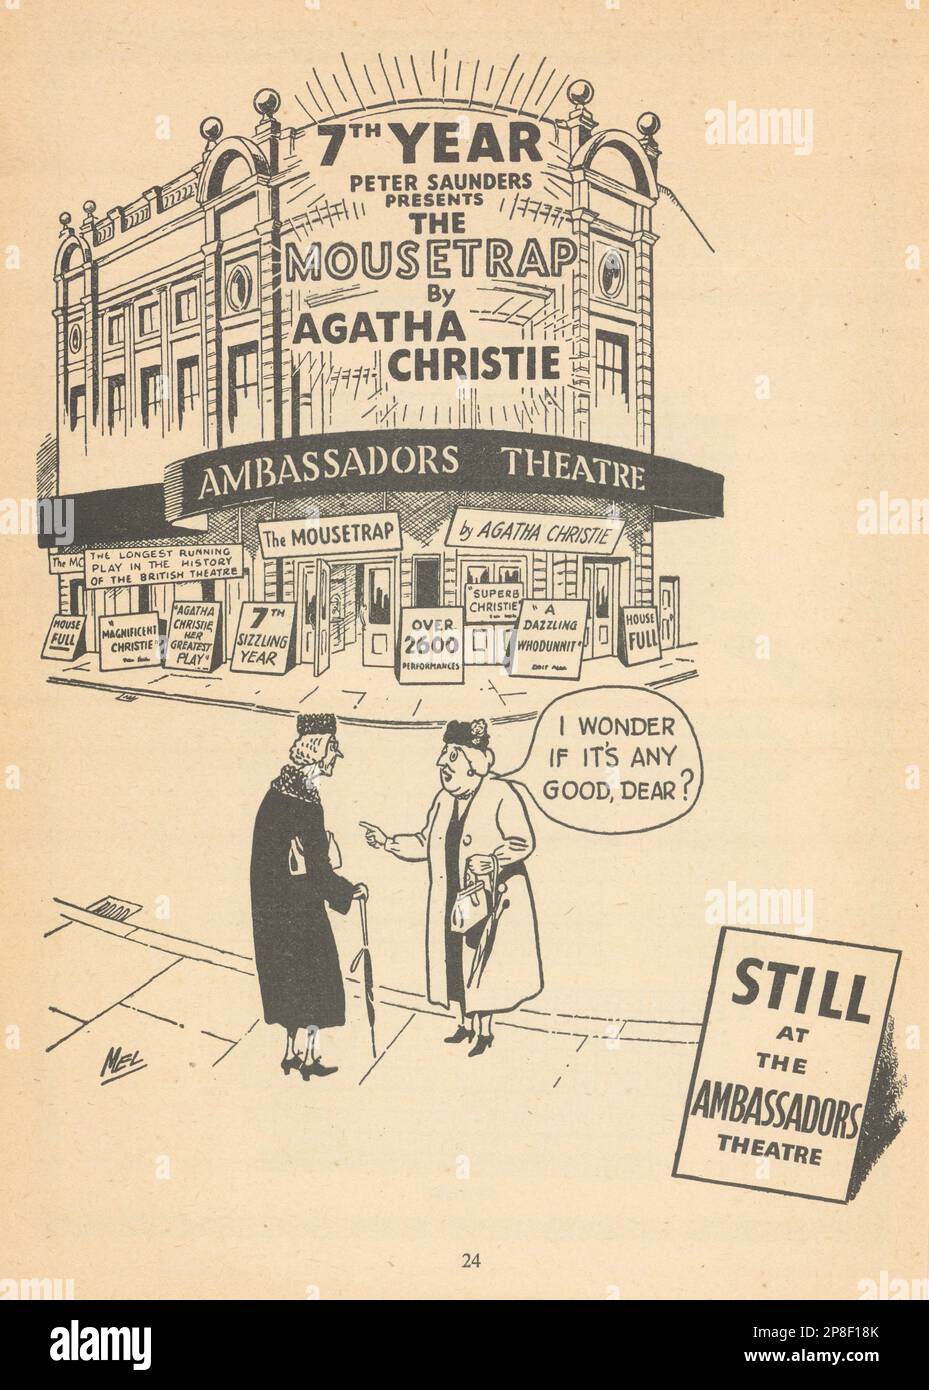 7th Year. The Mousetrap by Agatha Christie. Ambassadors Theatre. Saunders 1960 Stock Photo